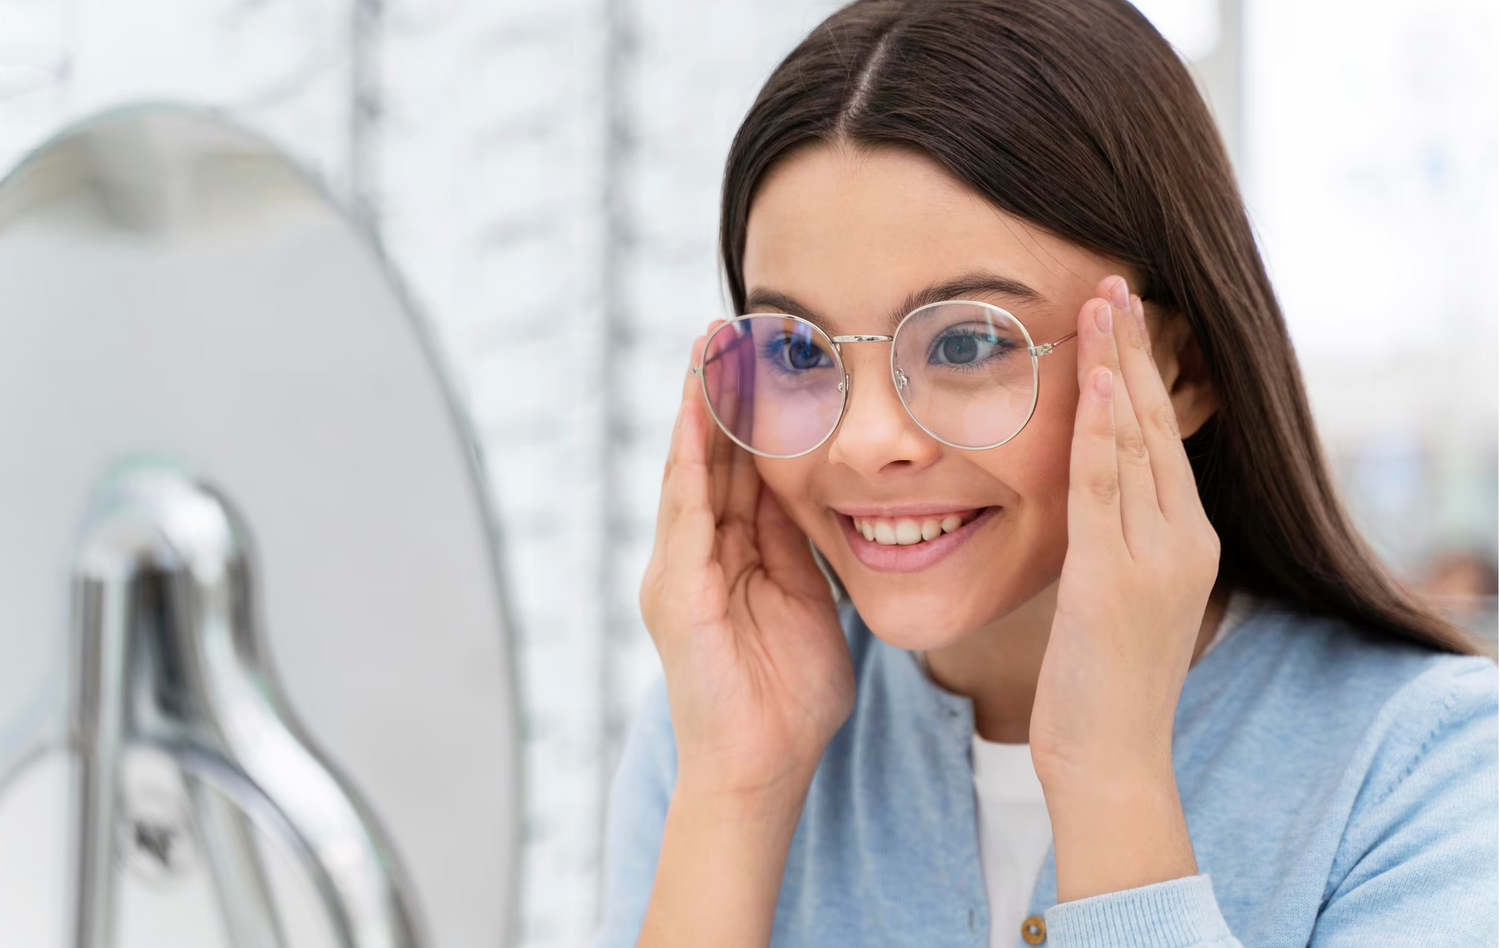 The Ultimate Guide to Cleaning and Caring for Your Eyeglasses: Expert Tips for Crystal-Clear Vision